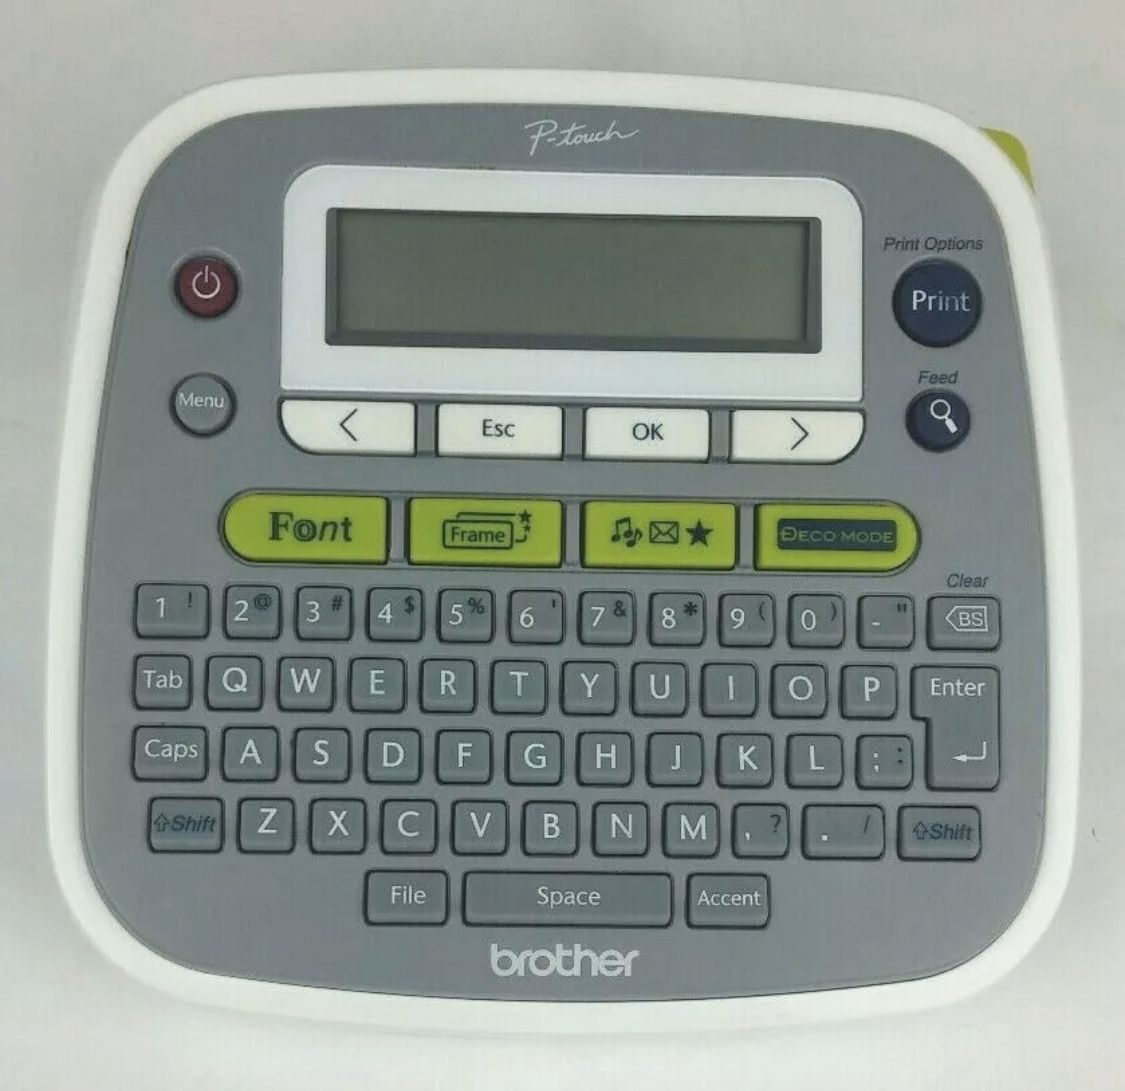 Brother P-Touch PT-D200 Label Thermal Printer